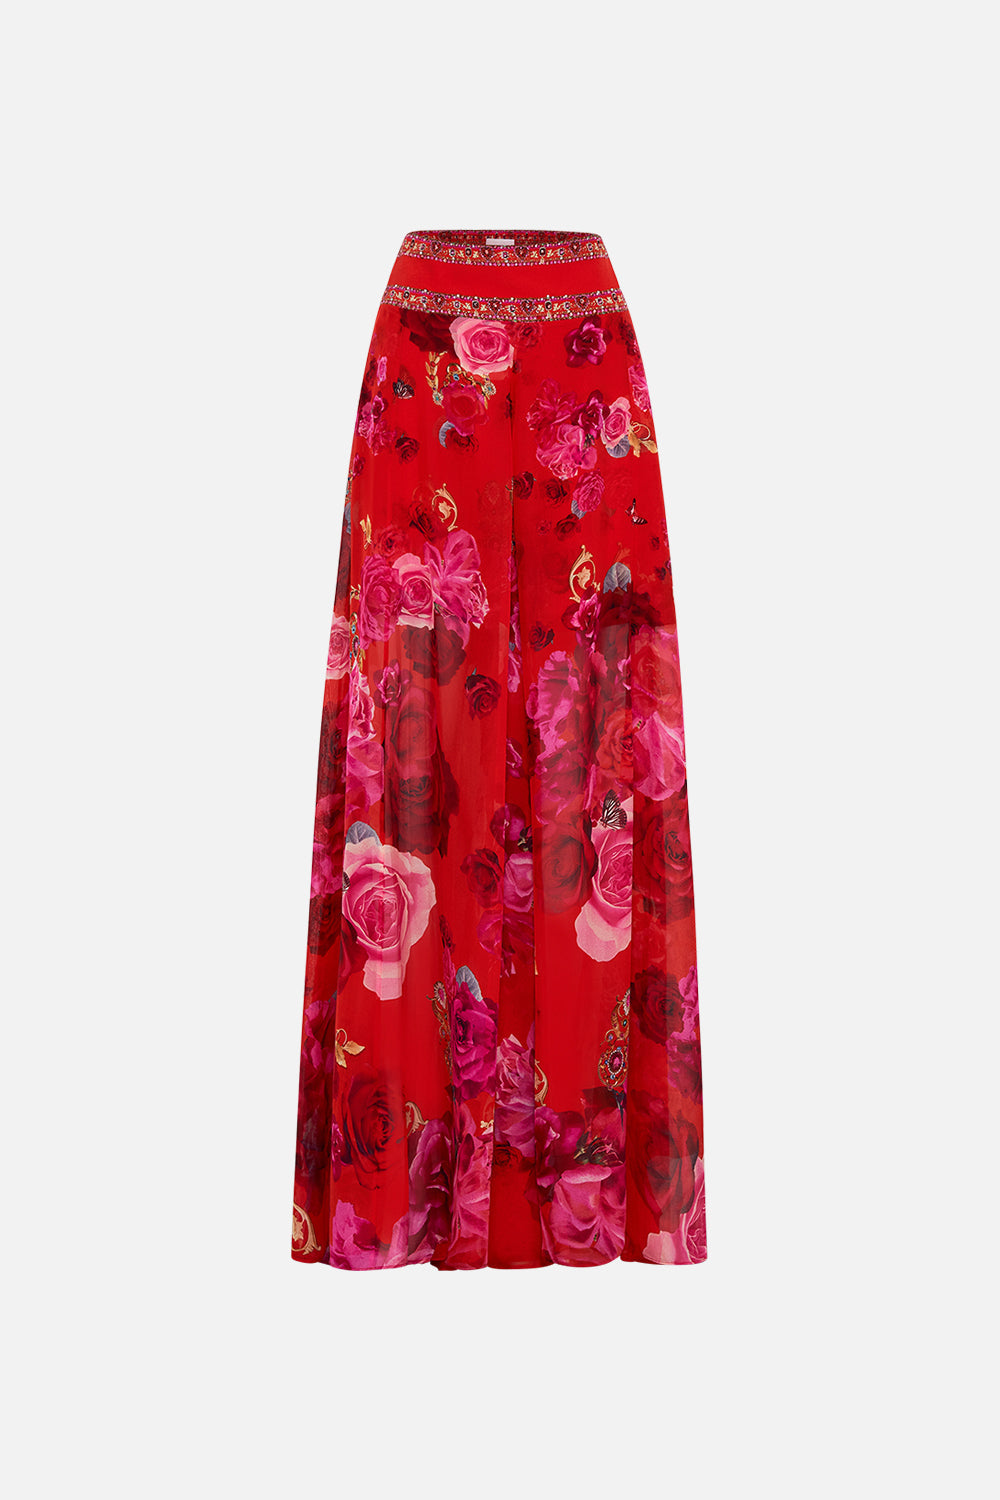 CAMILLA wide leg floral red pants in Italian Rosa print